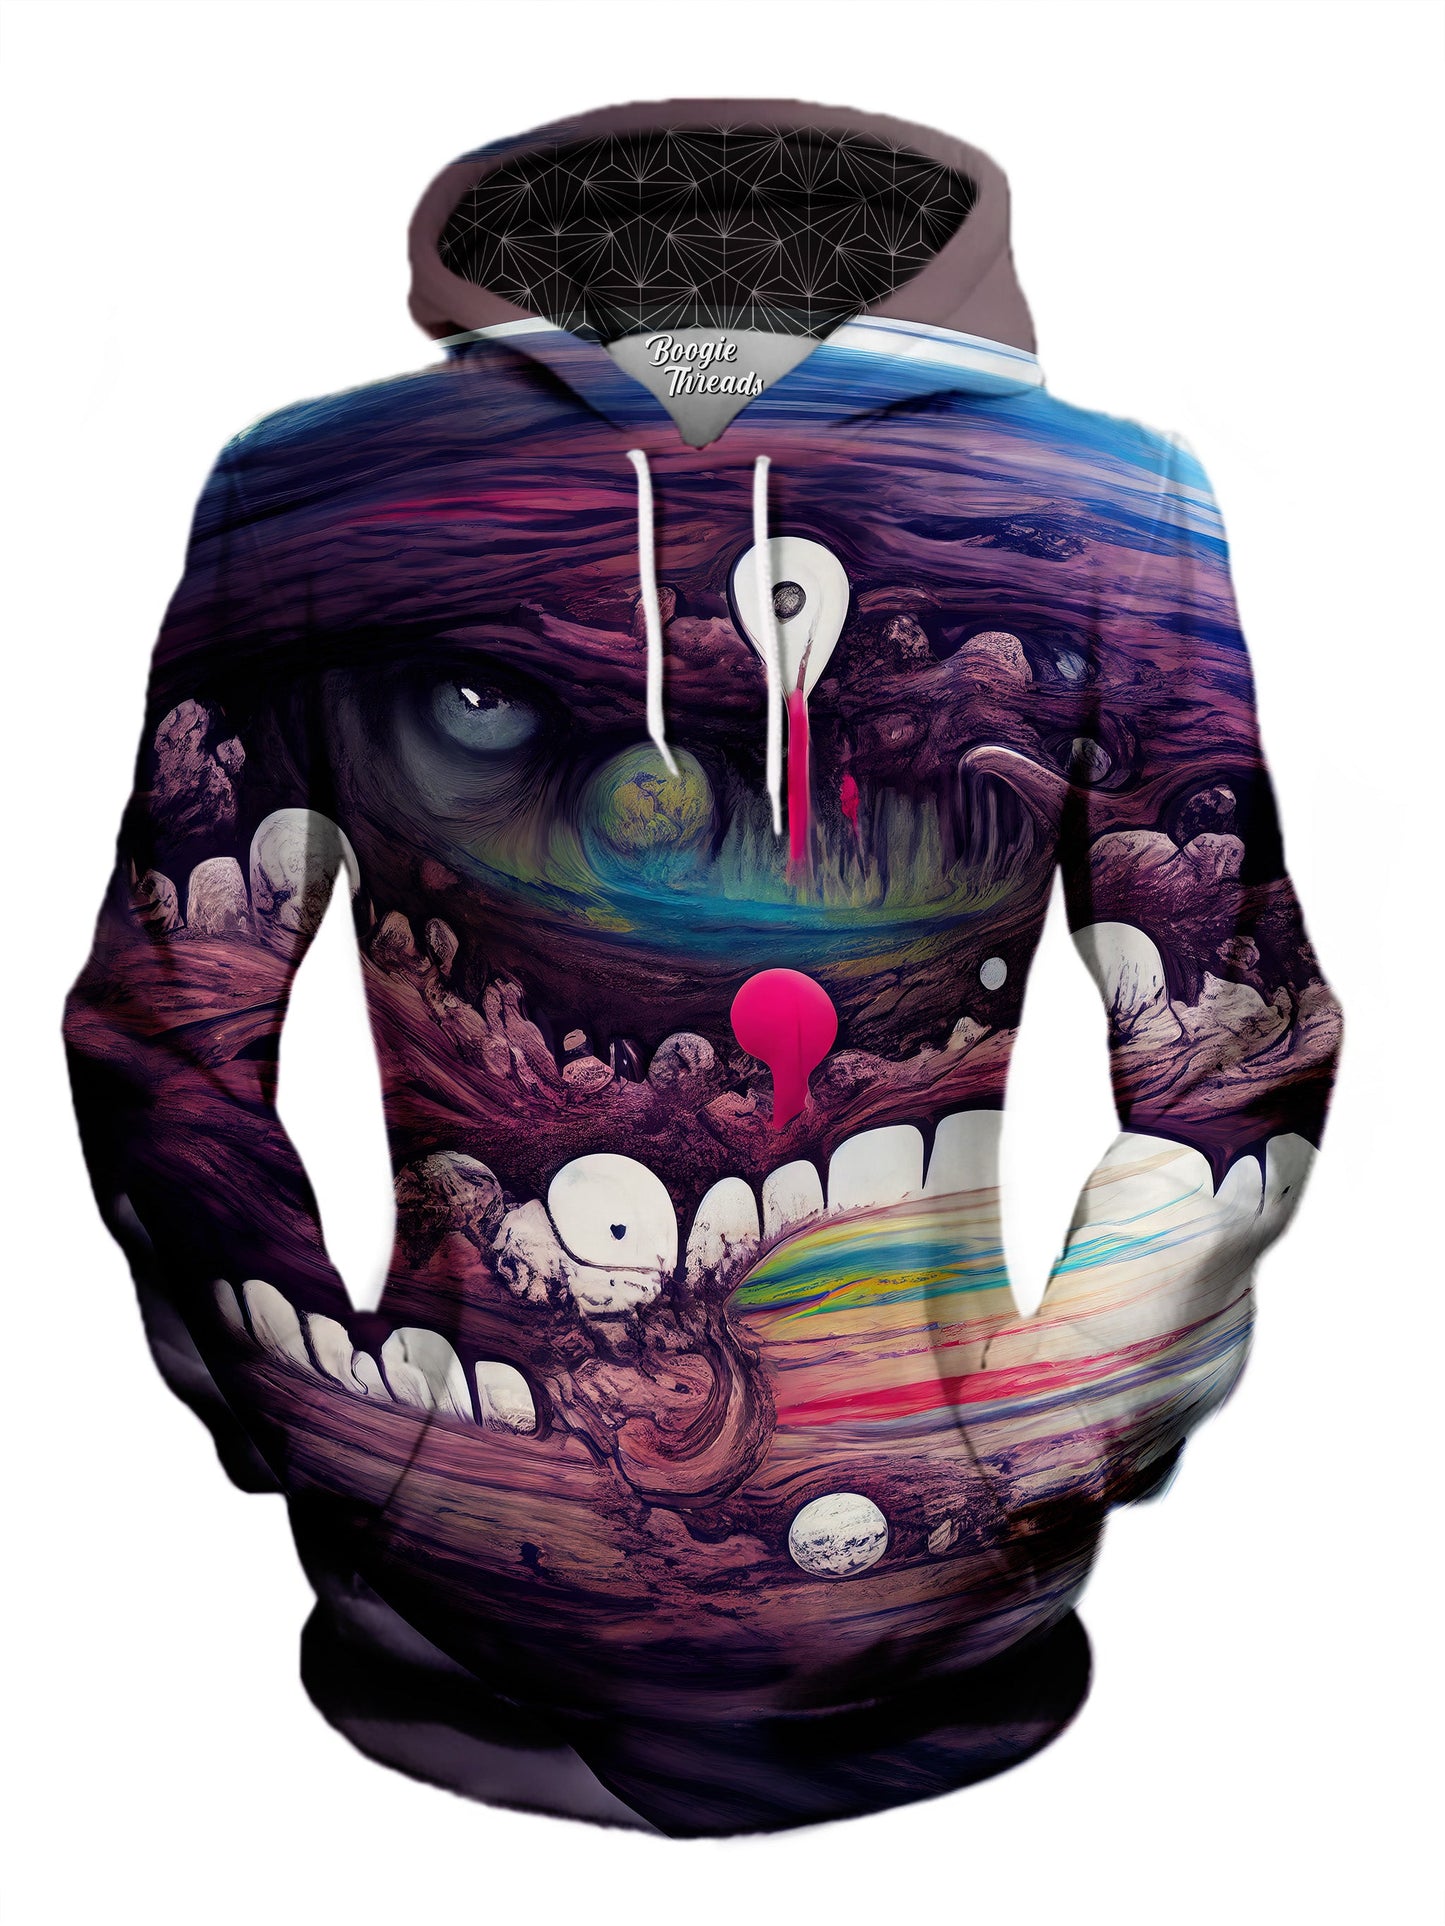 Temporary Imagination Unisex Pullover Hoodie - EDM Festival Clothing - Boogie Threads